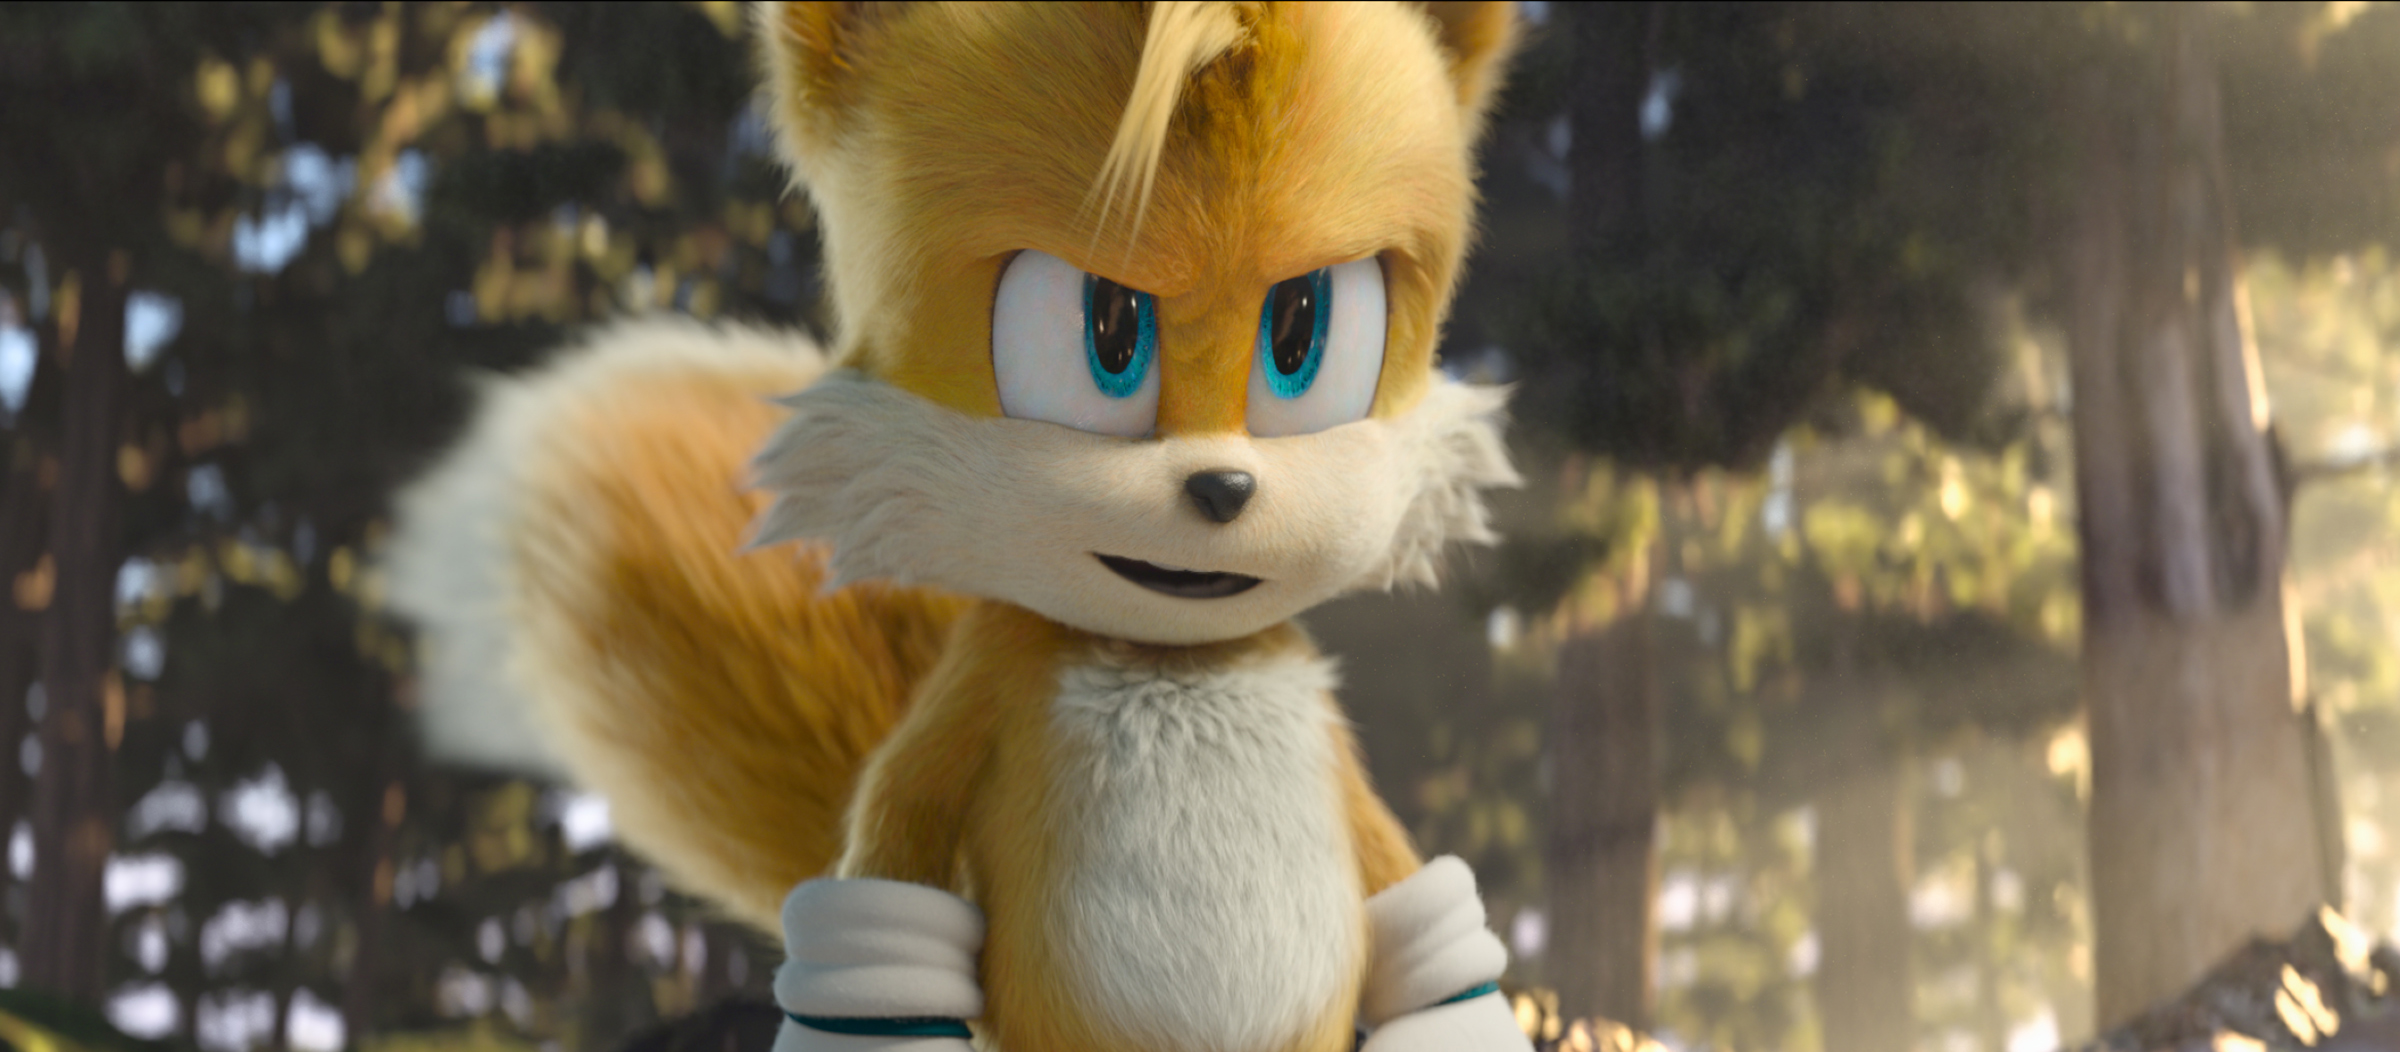 Tails (Colleen O'Shaughnessey) in Sonic The Hedgehog 2 from Paramount Pictures and Sega. Photo Credit: Courtesy Paramount Pictures and Sega of America.